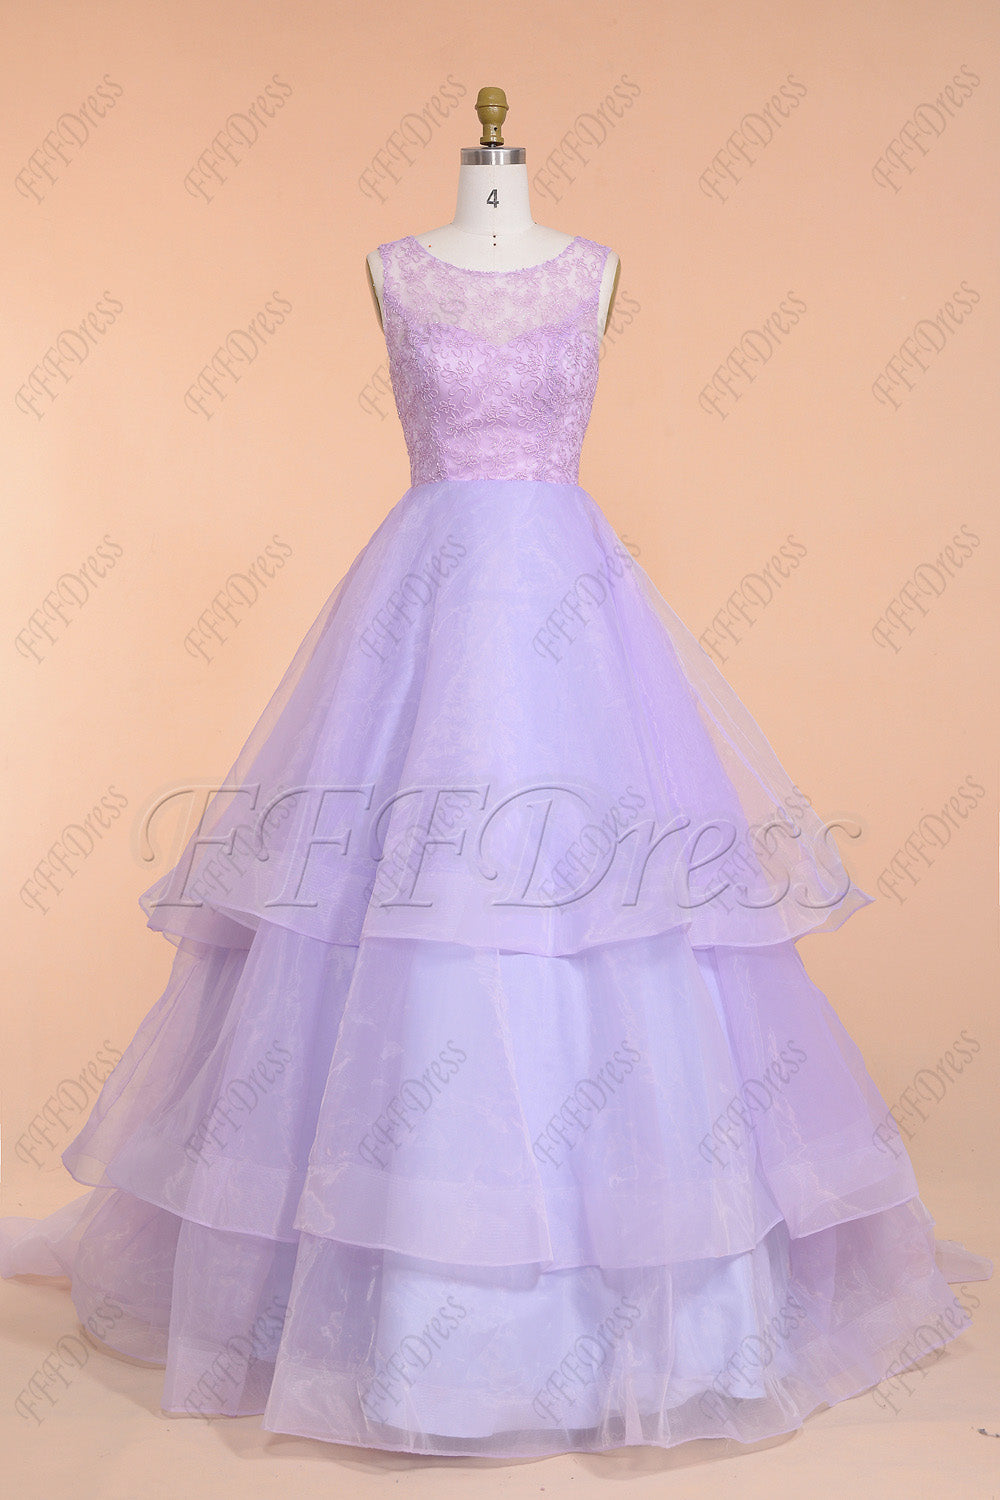 Lavender tiered ball gown prom dresses long